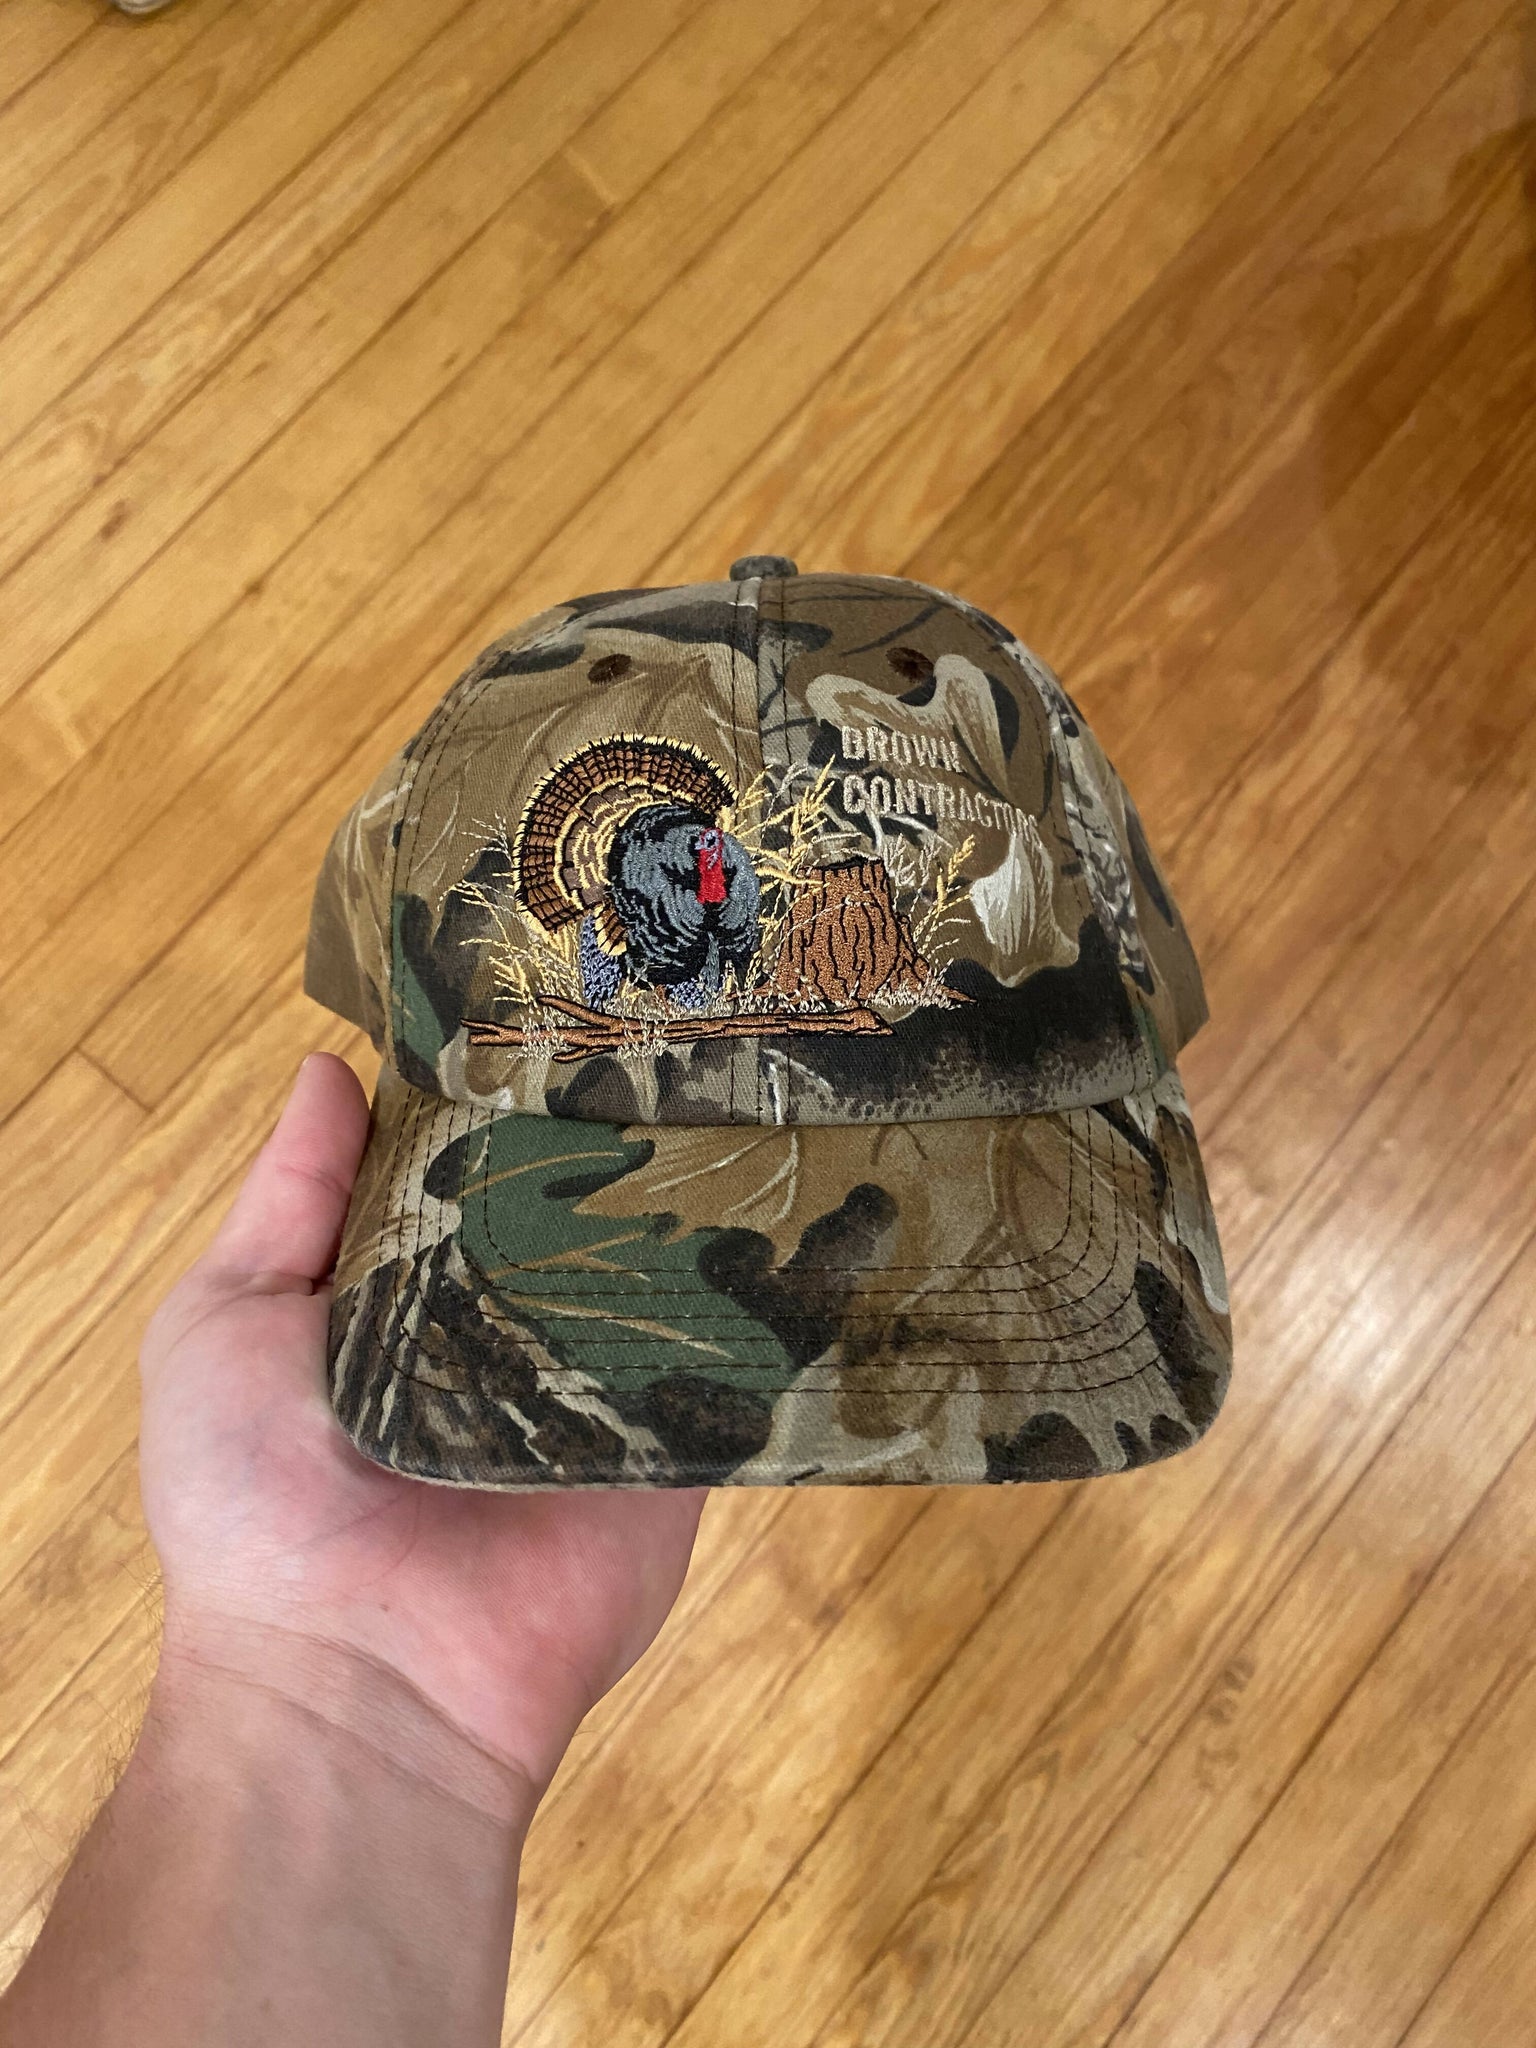 Faux Leathered Brown/Realtree AP Camo Cap CRS Marketing